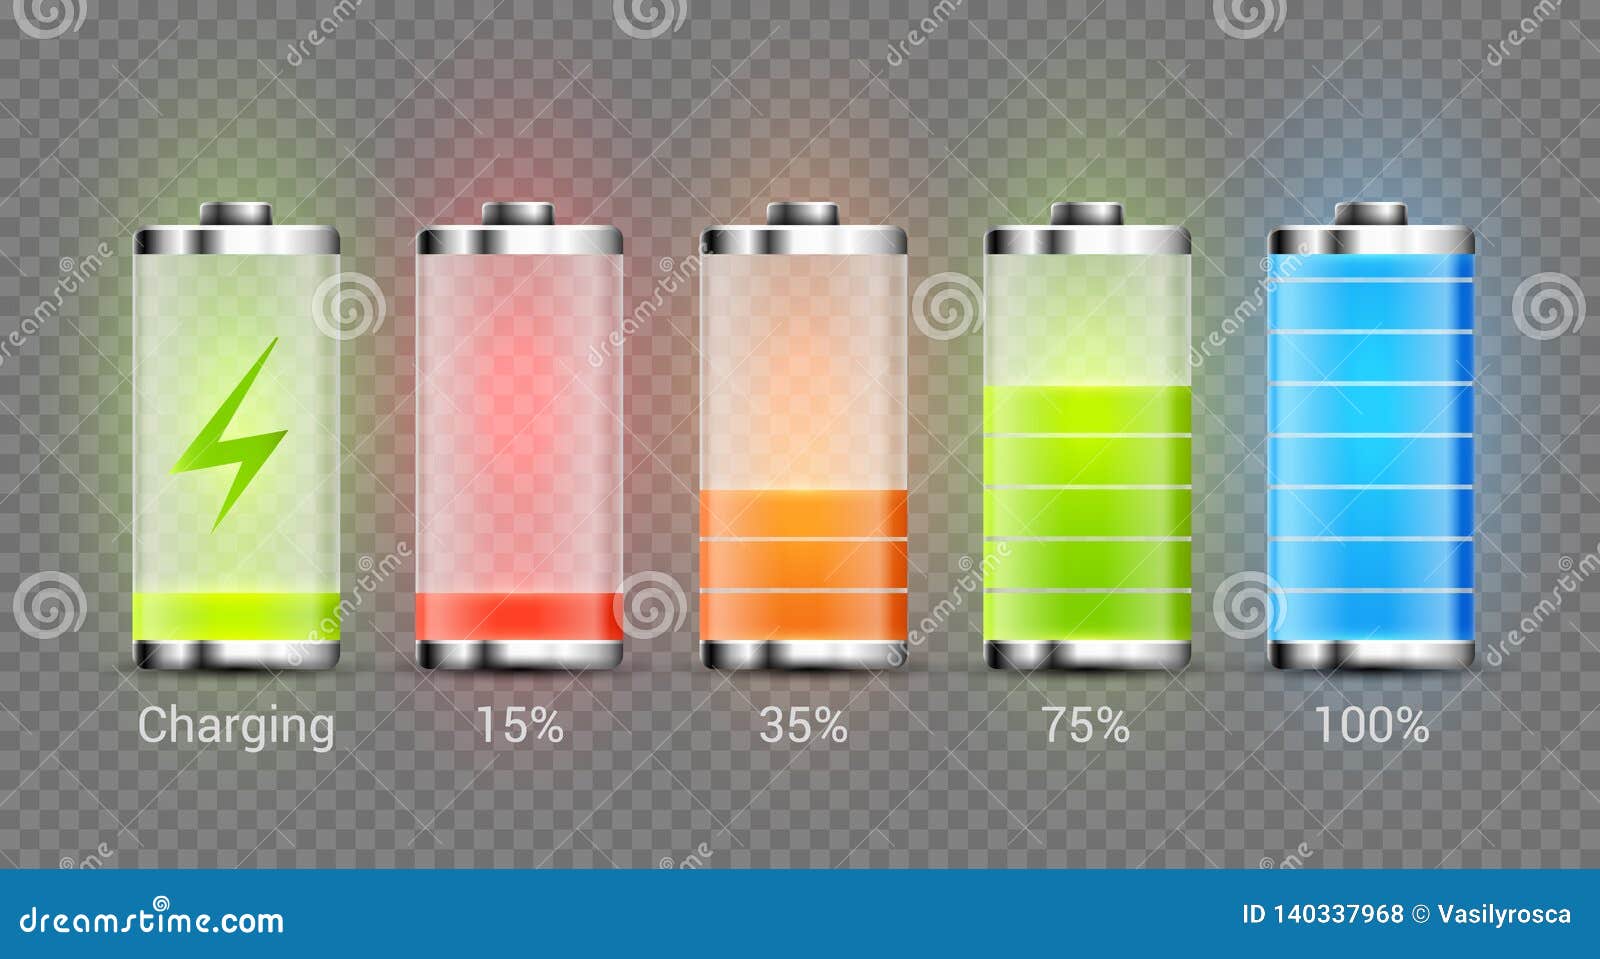 battery charge full power energy level. recharge battery indicator. low power mibile fuel